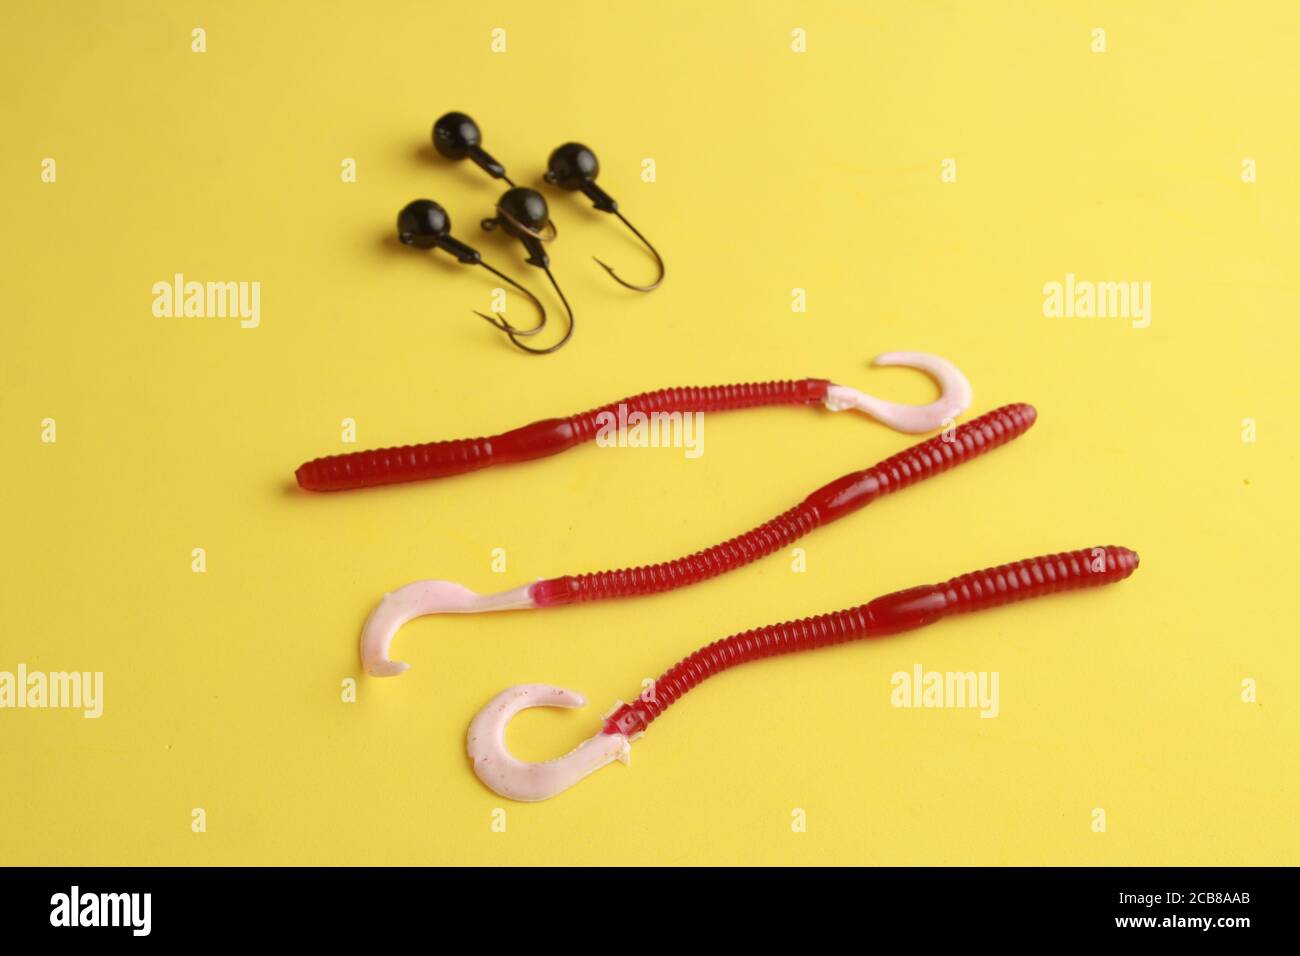 Zzinger, Rip Tide Striker, Stingstilda, and Deadly Dick drift jigging lures  for salmon and bottom fish Stock Photo - Alamy